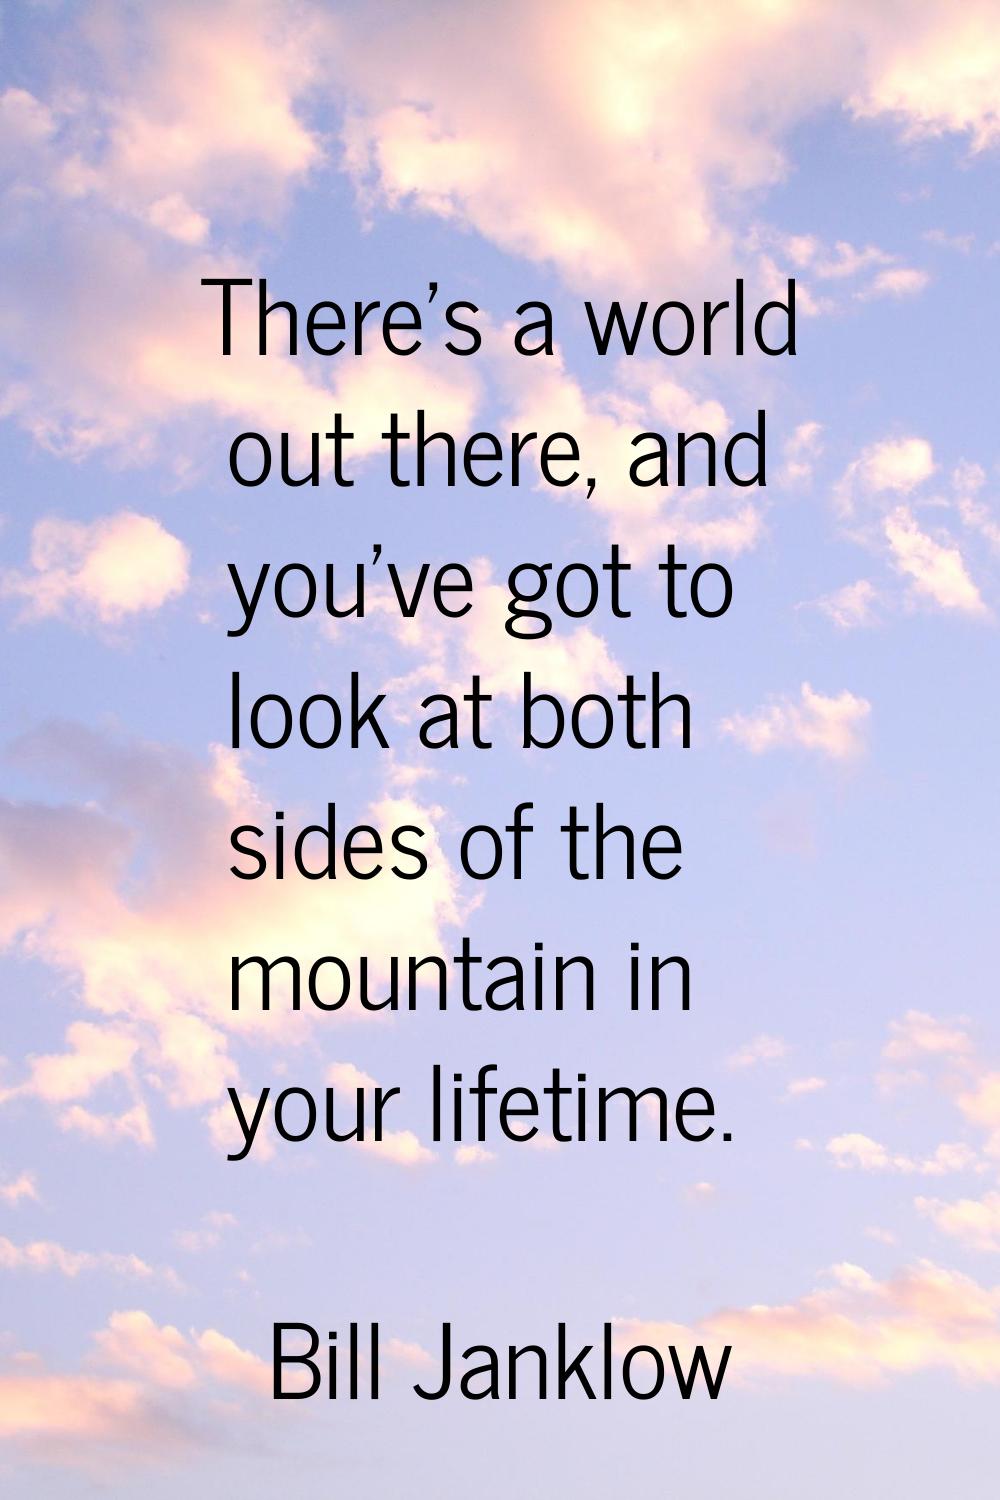 There's a world out there, and you've got to look at both sides of the mountain in your lifetime.